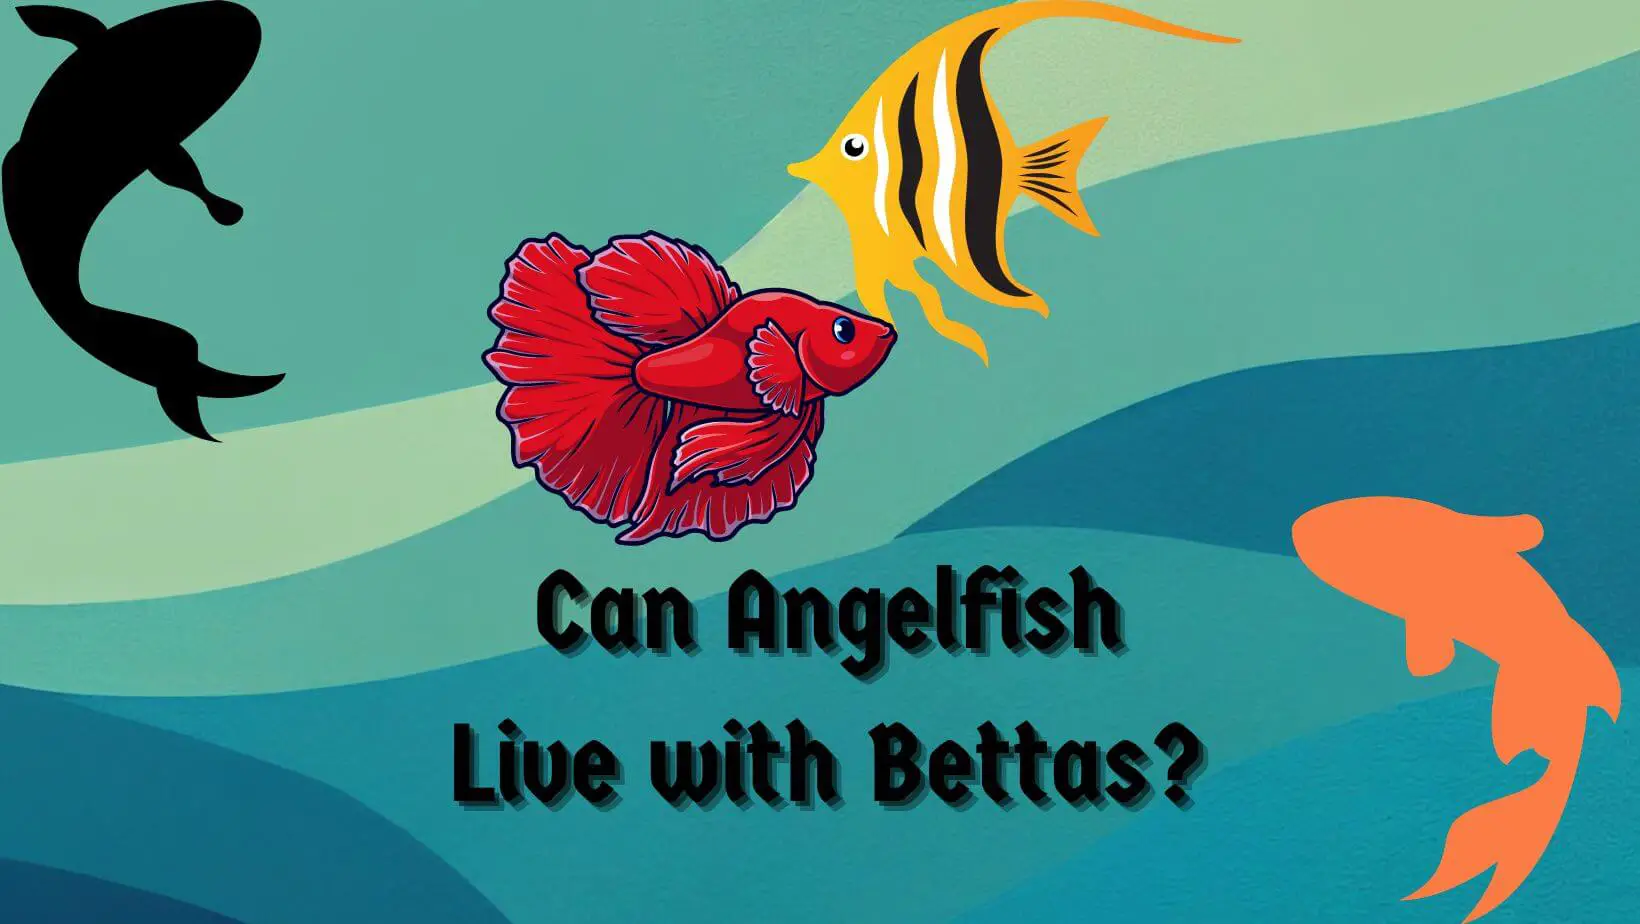 Can Angelfish Live with Bettas?